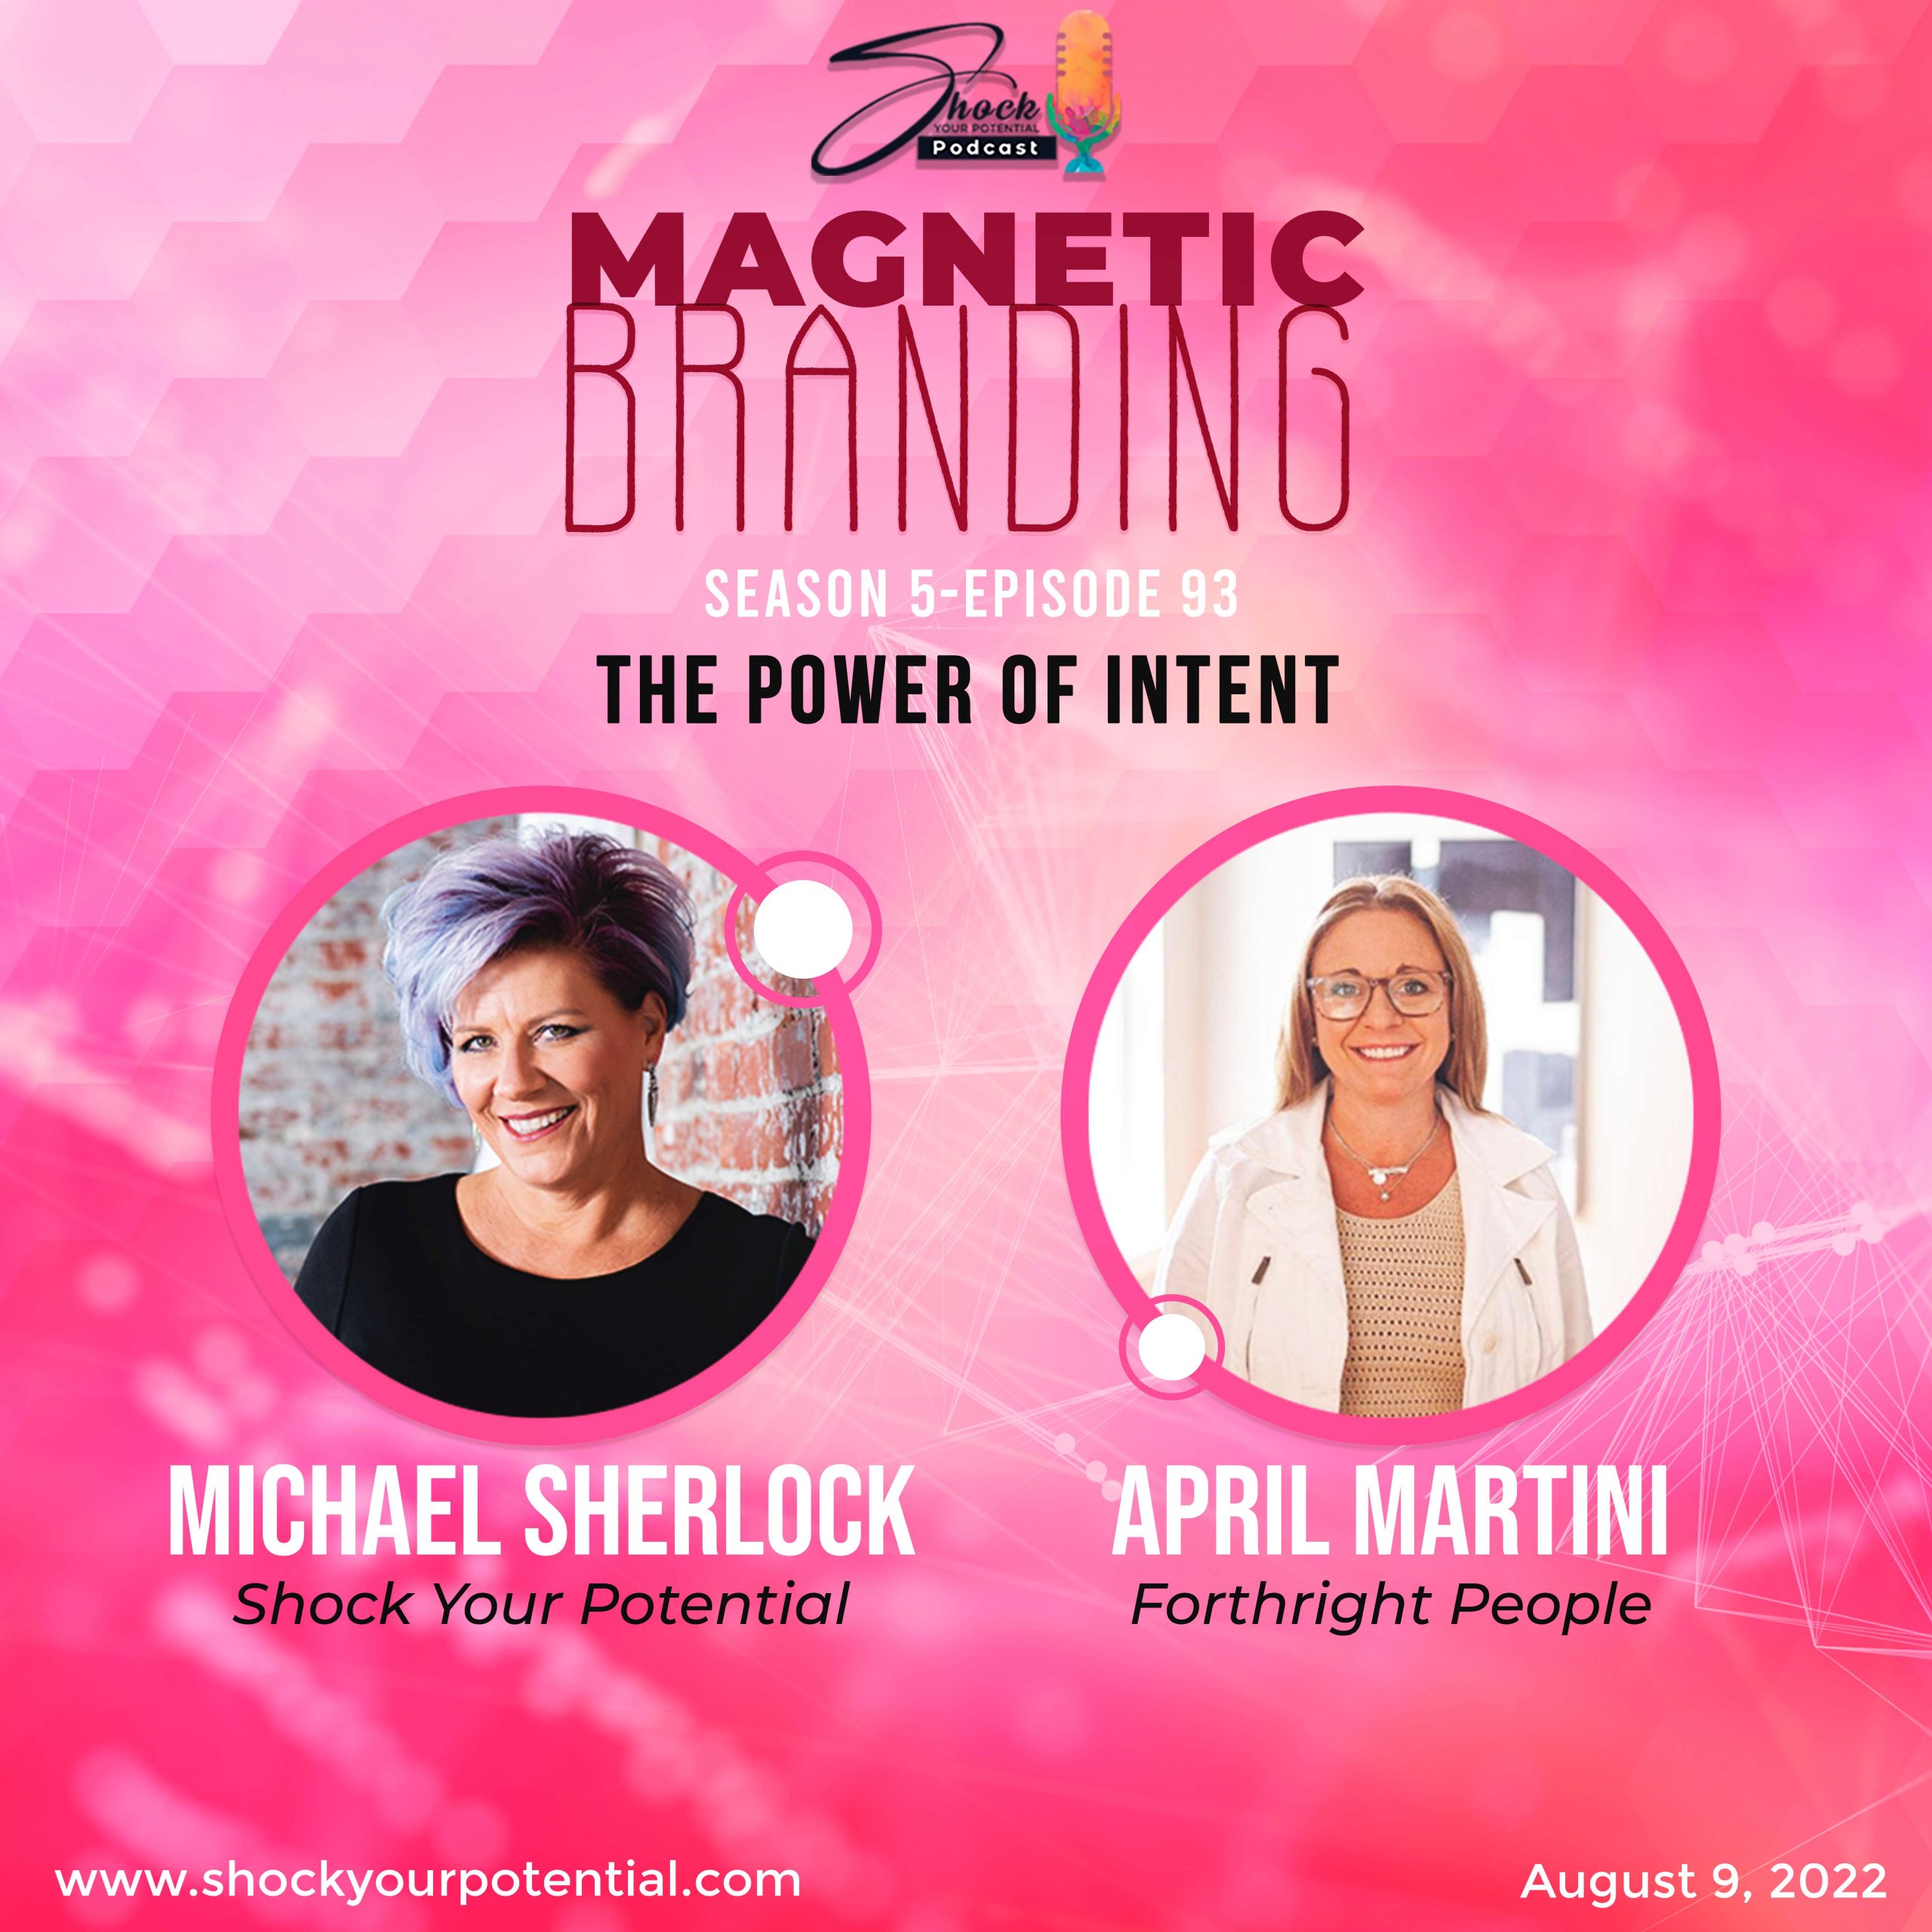 The Power of Intent – April Martini